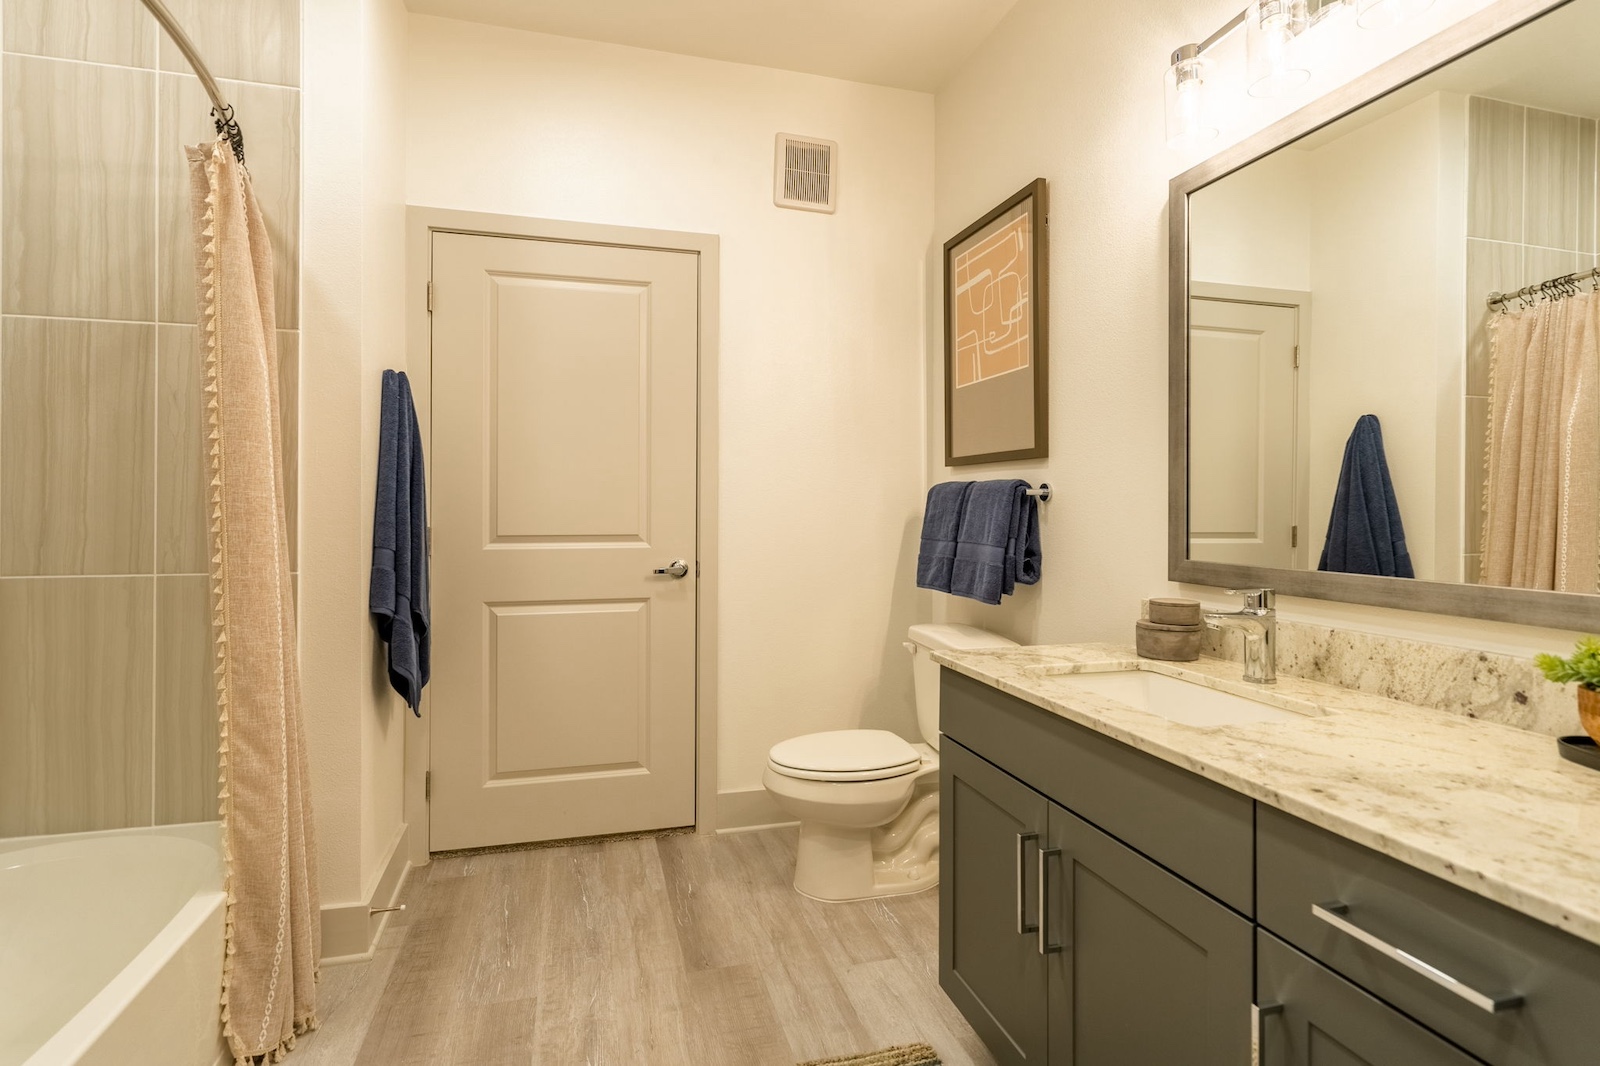 Spacious bathroom with granite countertops at our luxury apartments Cypress. Residences